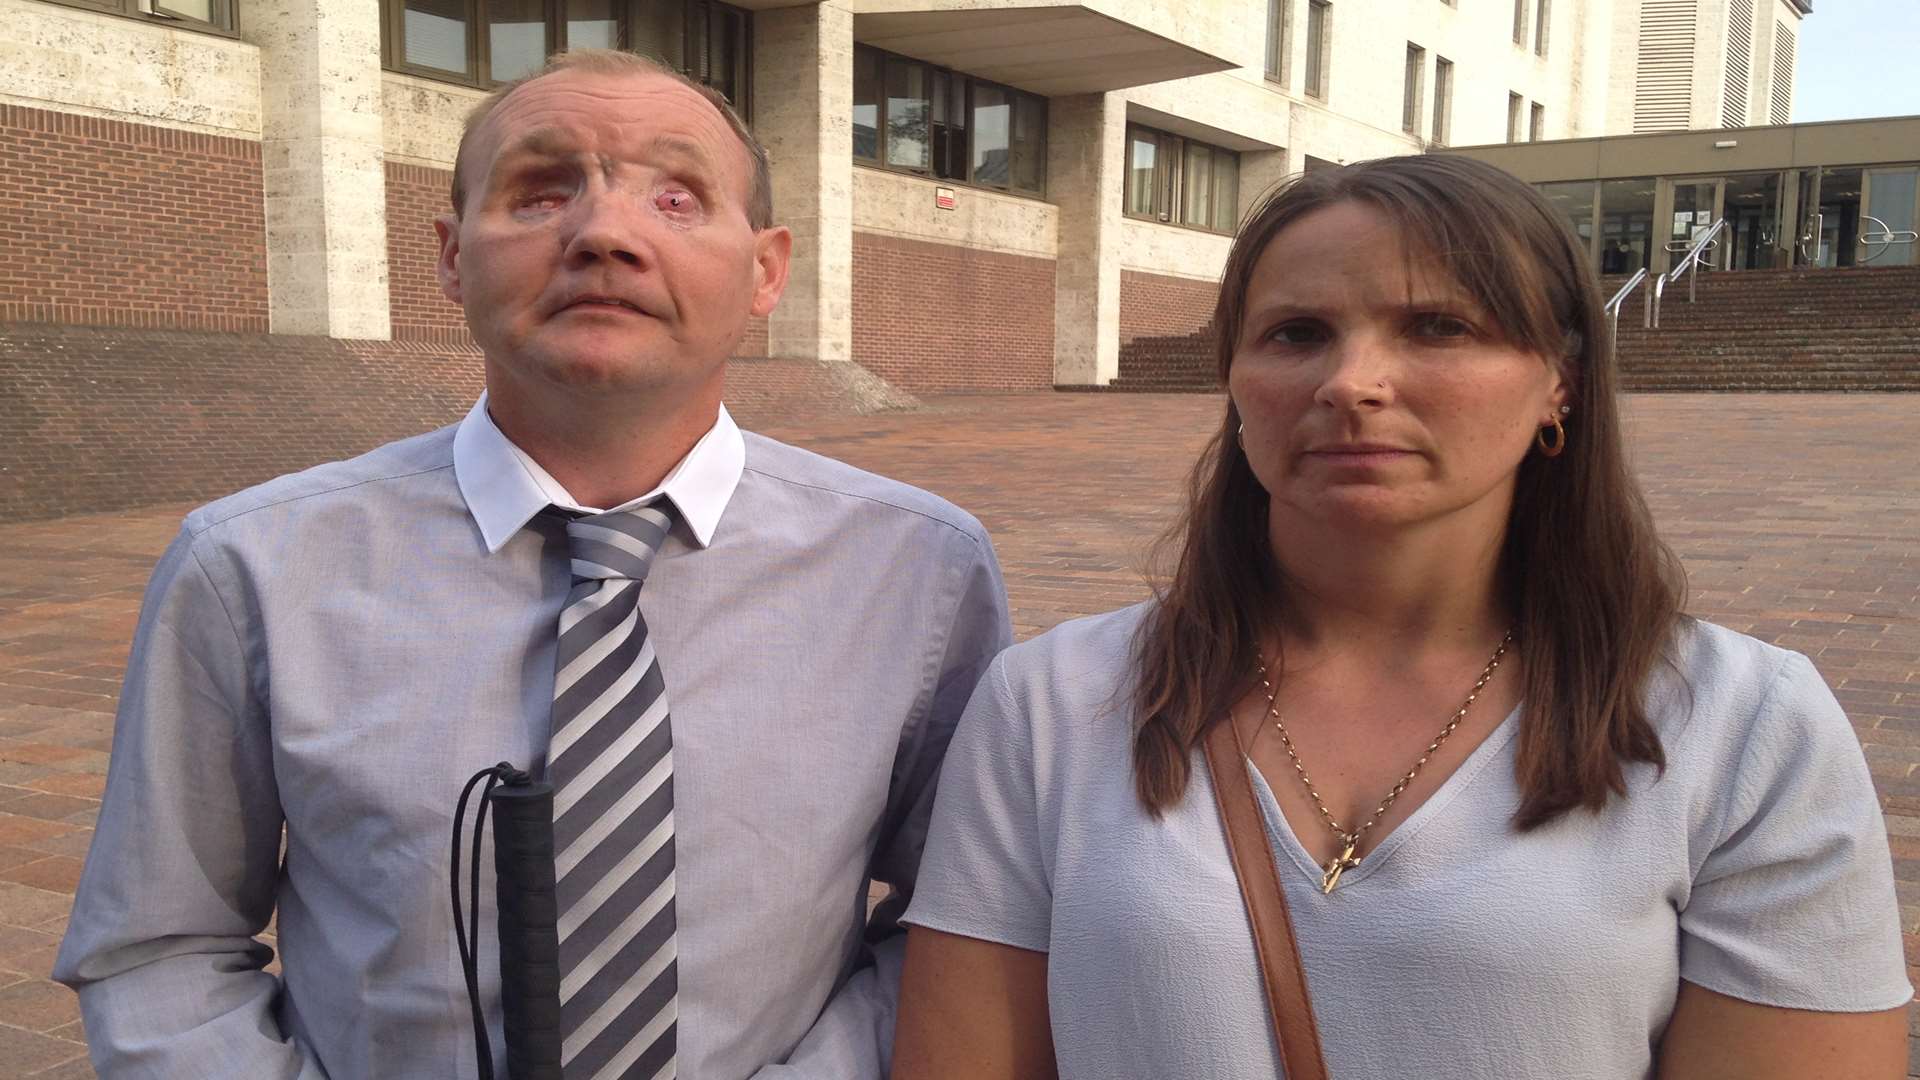 Andrew Foster and his wife Donna outside court